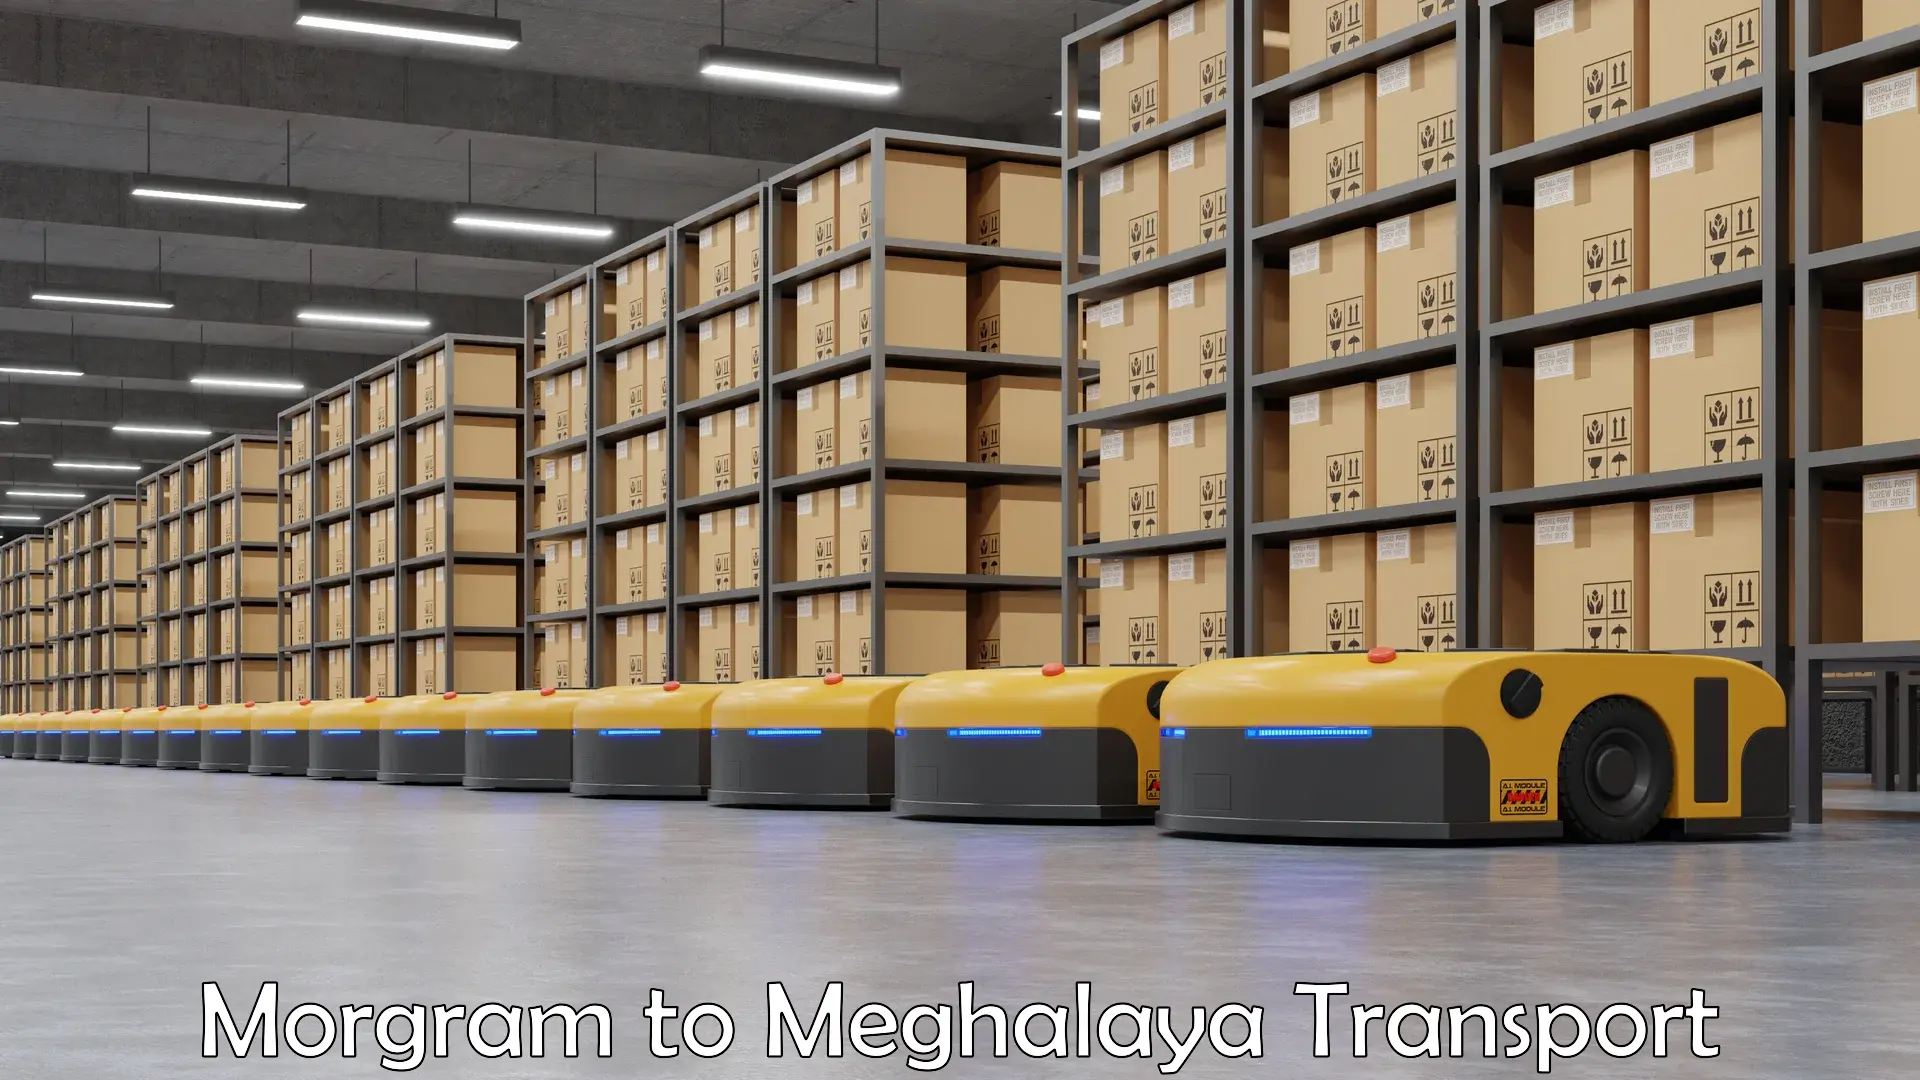 Transport bike from one state to another Morgram to Meghalaya